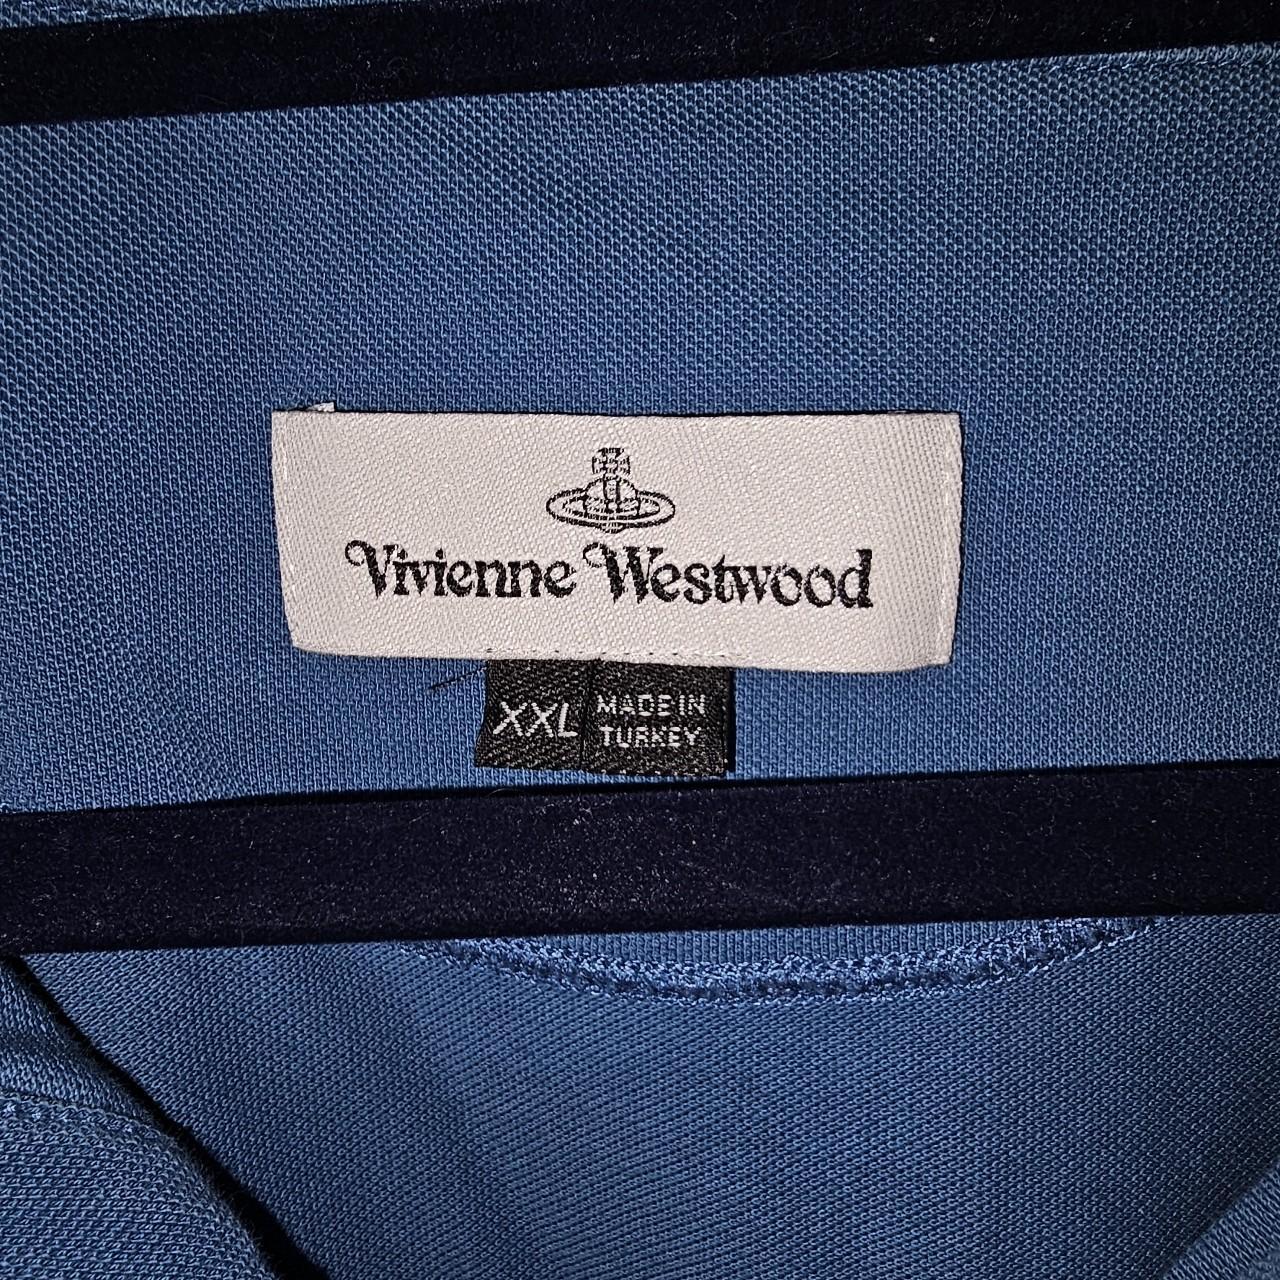 Vivienne Westwood polo shirt Whiting around the neck... - Depop